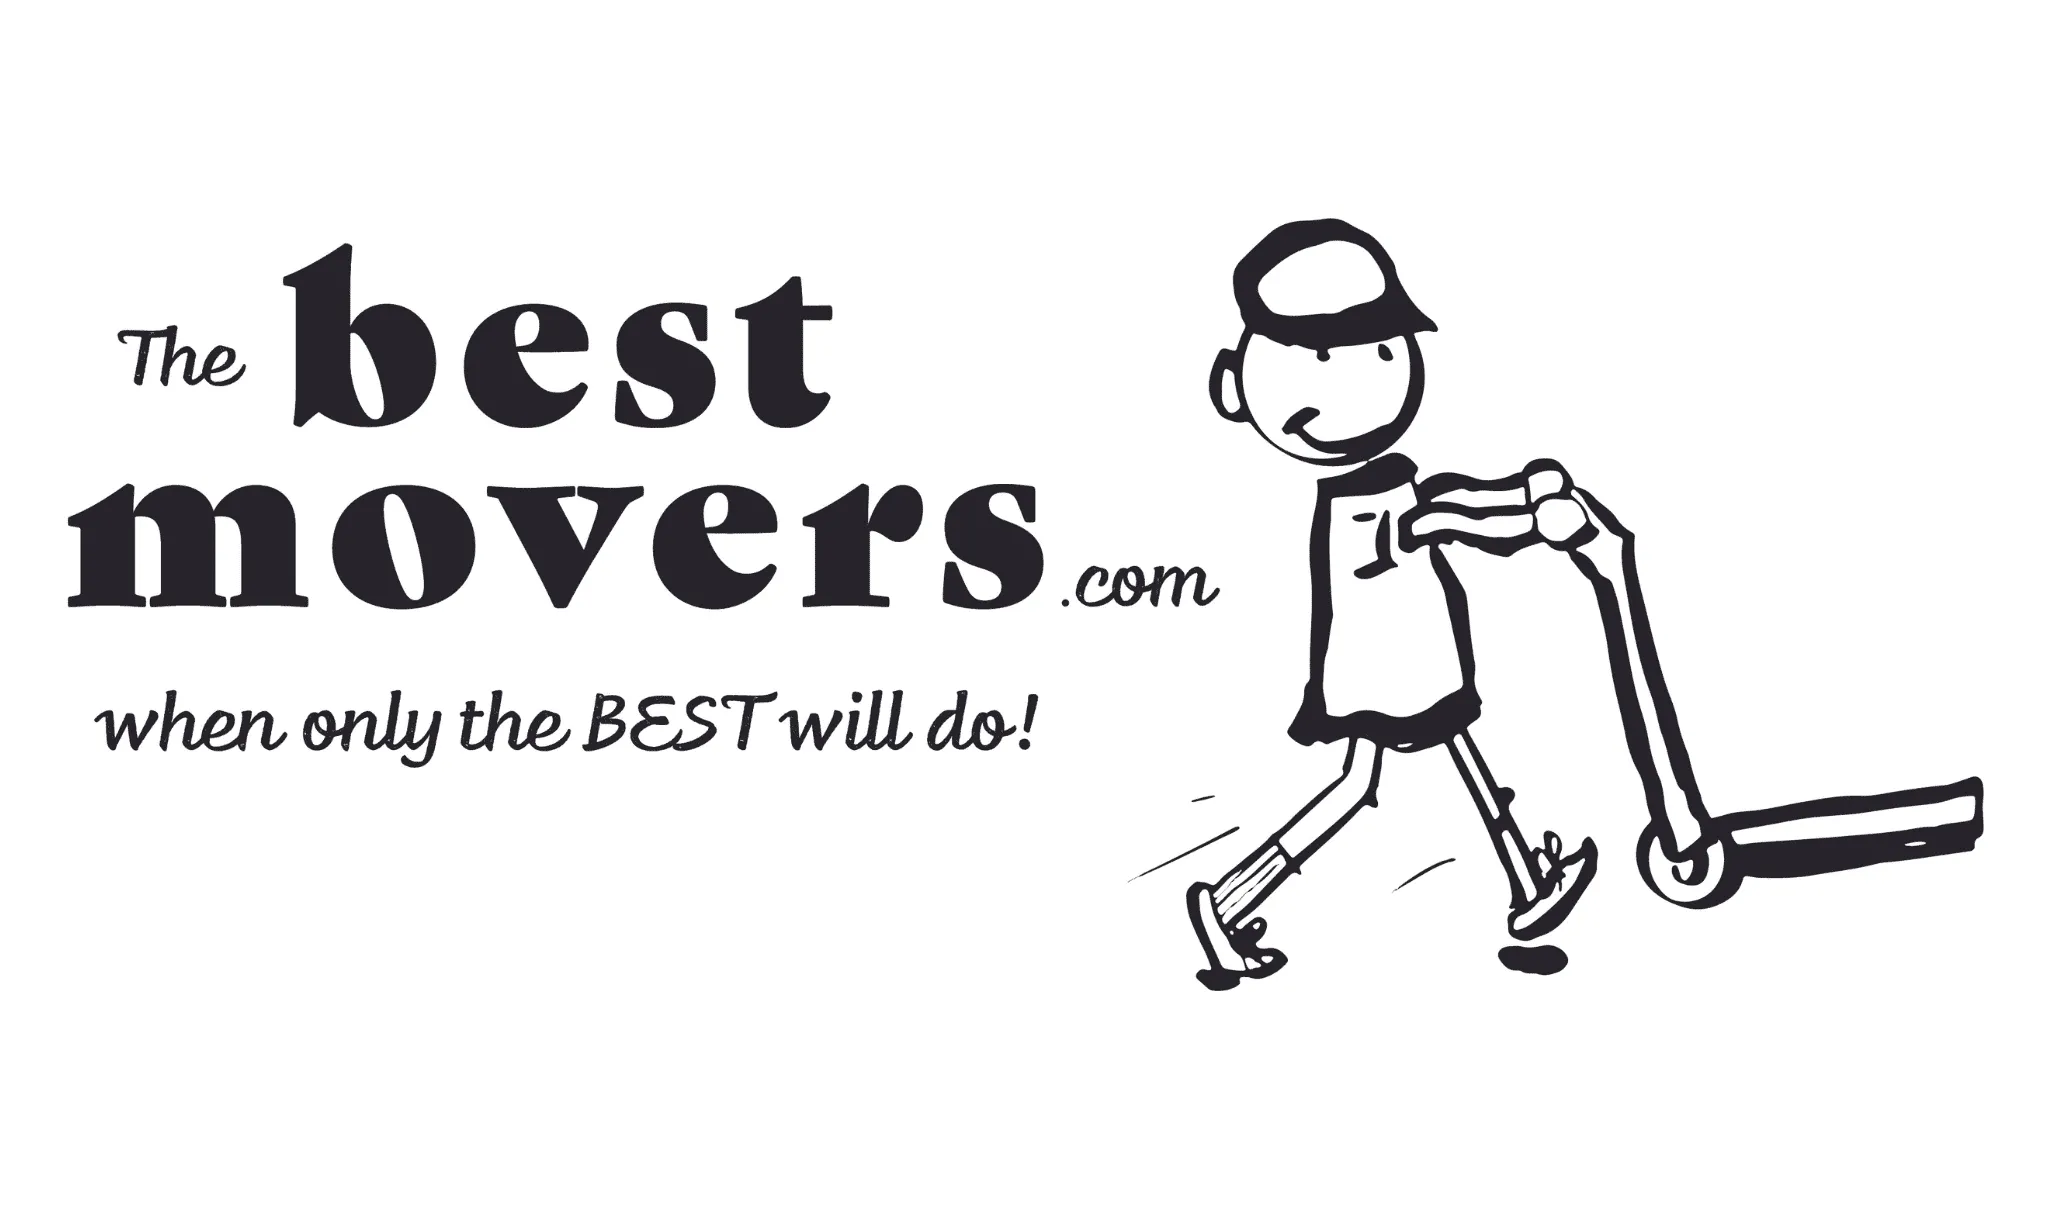 companies/logo/the-best-movers.webp